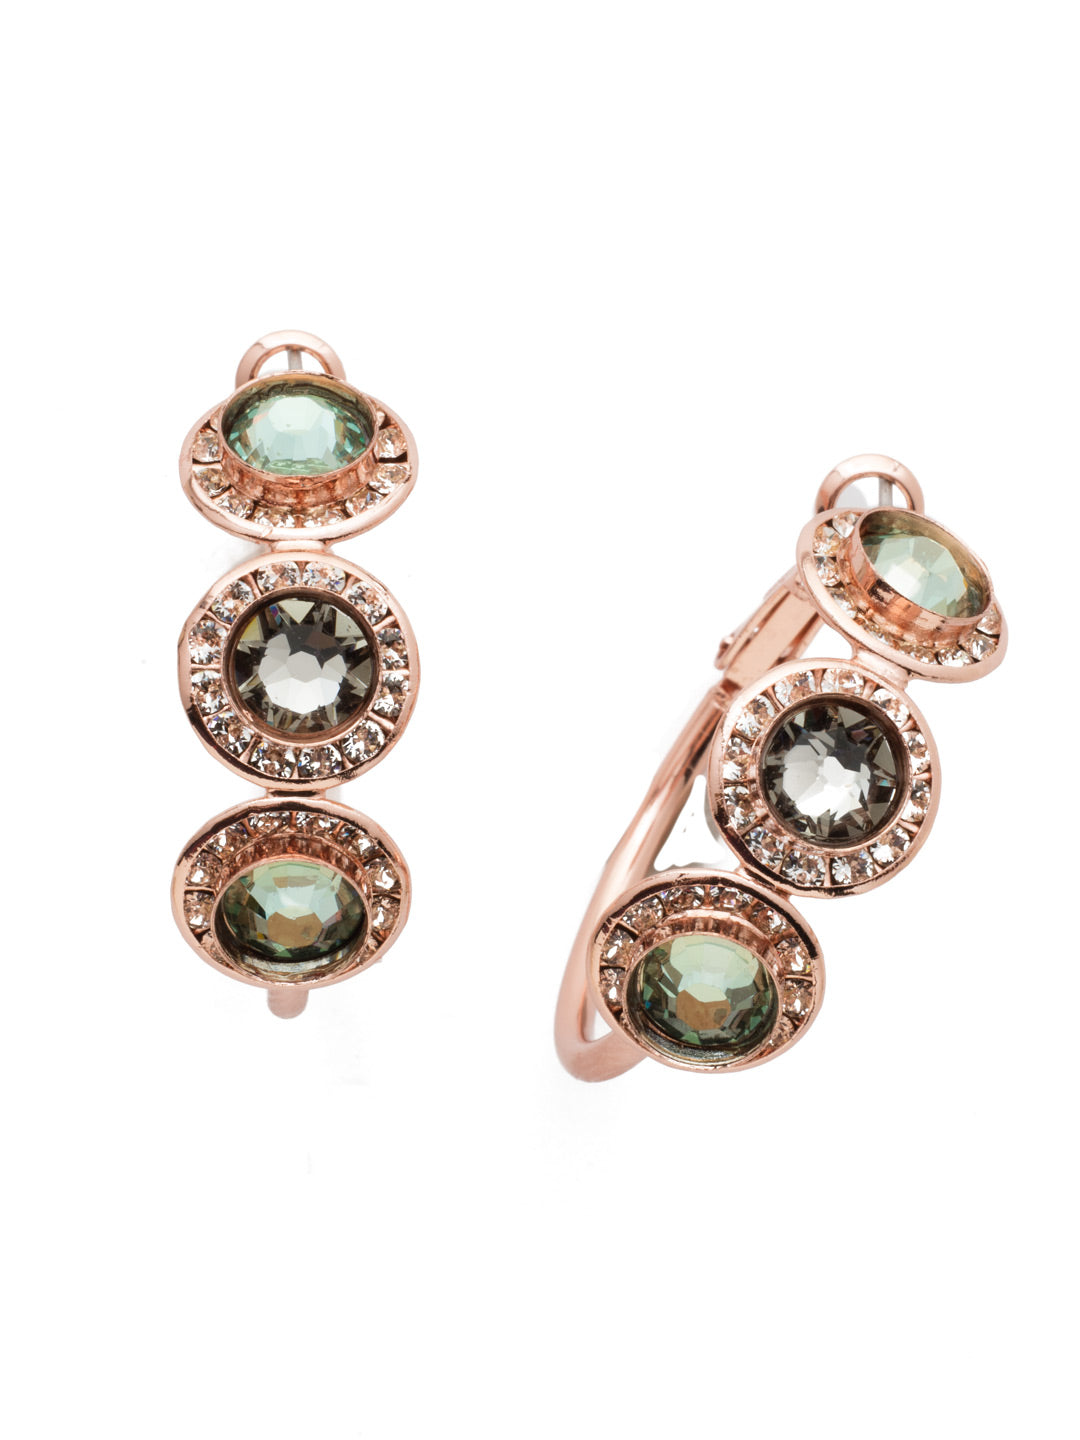 Saylor Hoop Earrings - EET14RGCAZ - Our Saylor Statement Earrings up the hoop game with a trio circular standout crystals encased in even more sparkle at their edges. Put them on and show them off. From Sorrelli's Crystal Azure collection in our Rose Gold-tone finish.